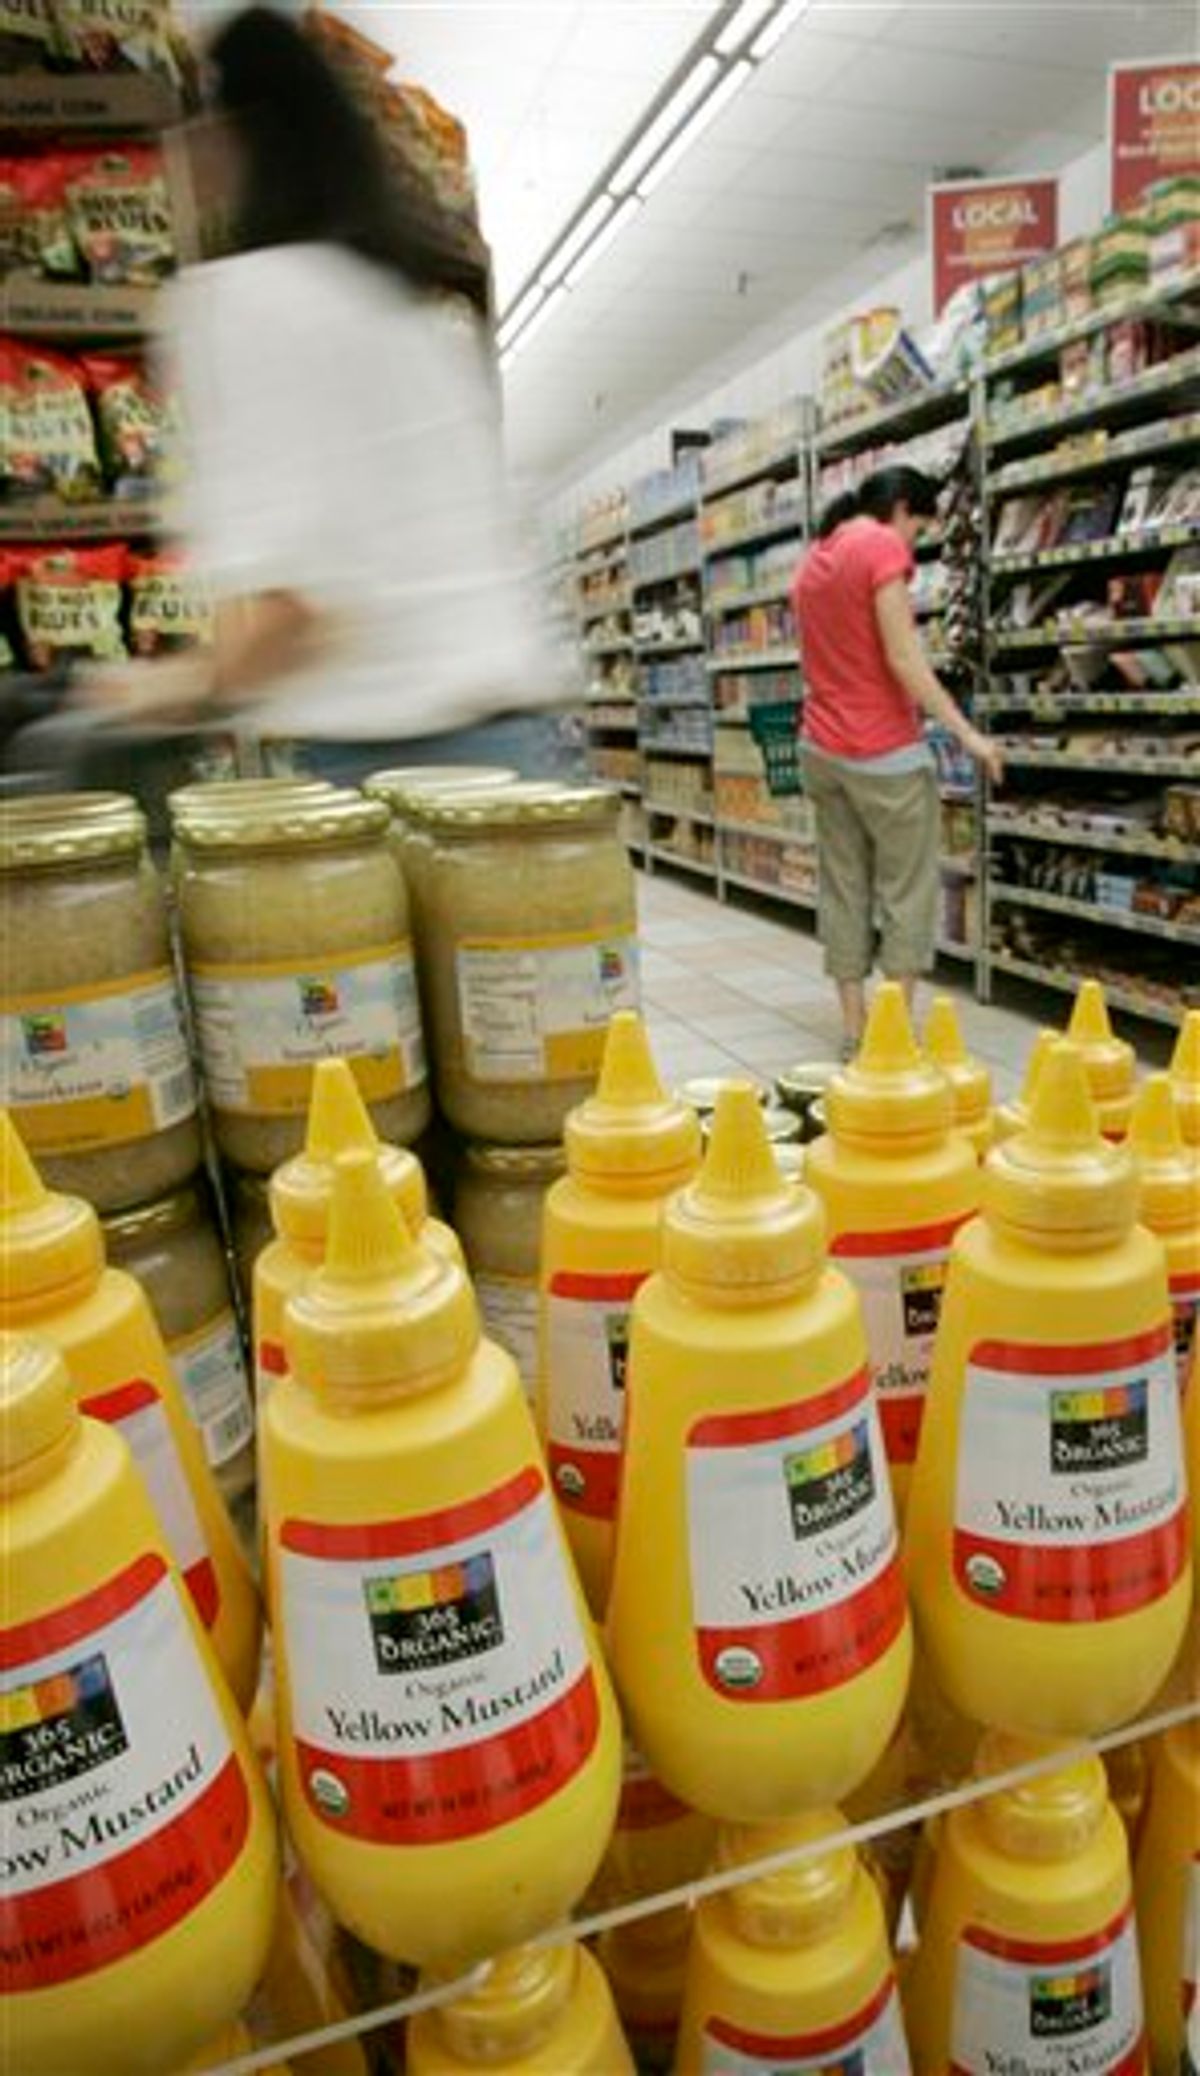 In this photo taken Tuesday, May 11, 2010, shoppers browse near a display of 365 Organic brand mustard at a Whole Foods Market, Inc., store in Little Rock, Ark. Whole Foods reports quarterly earnings, Wednesday, May 12, 2010, after the market close. 365 Organic is a Whole Foods brand. (AP Photo/Danny Johnston)       (AP)